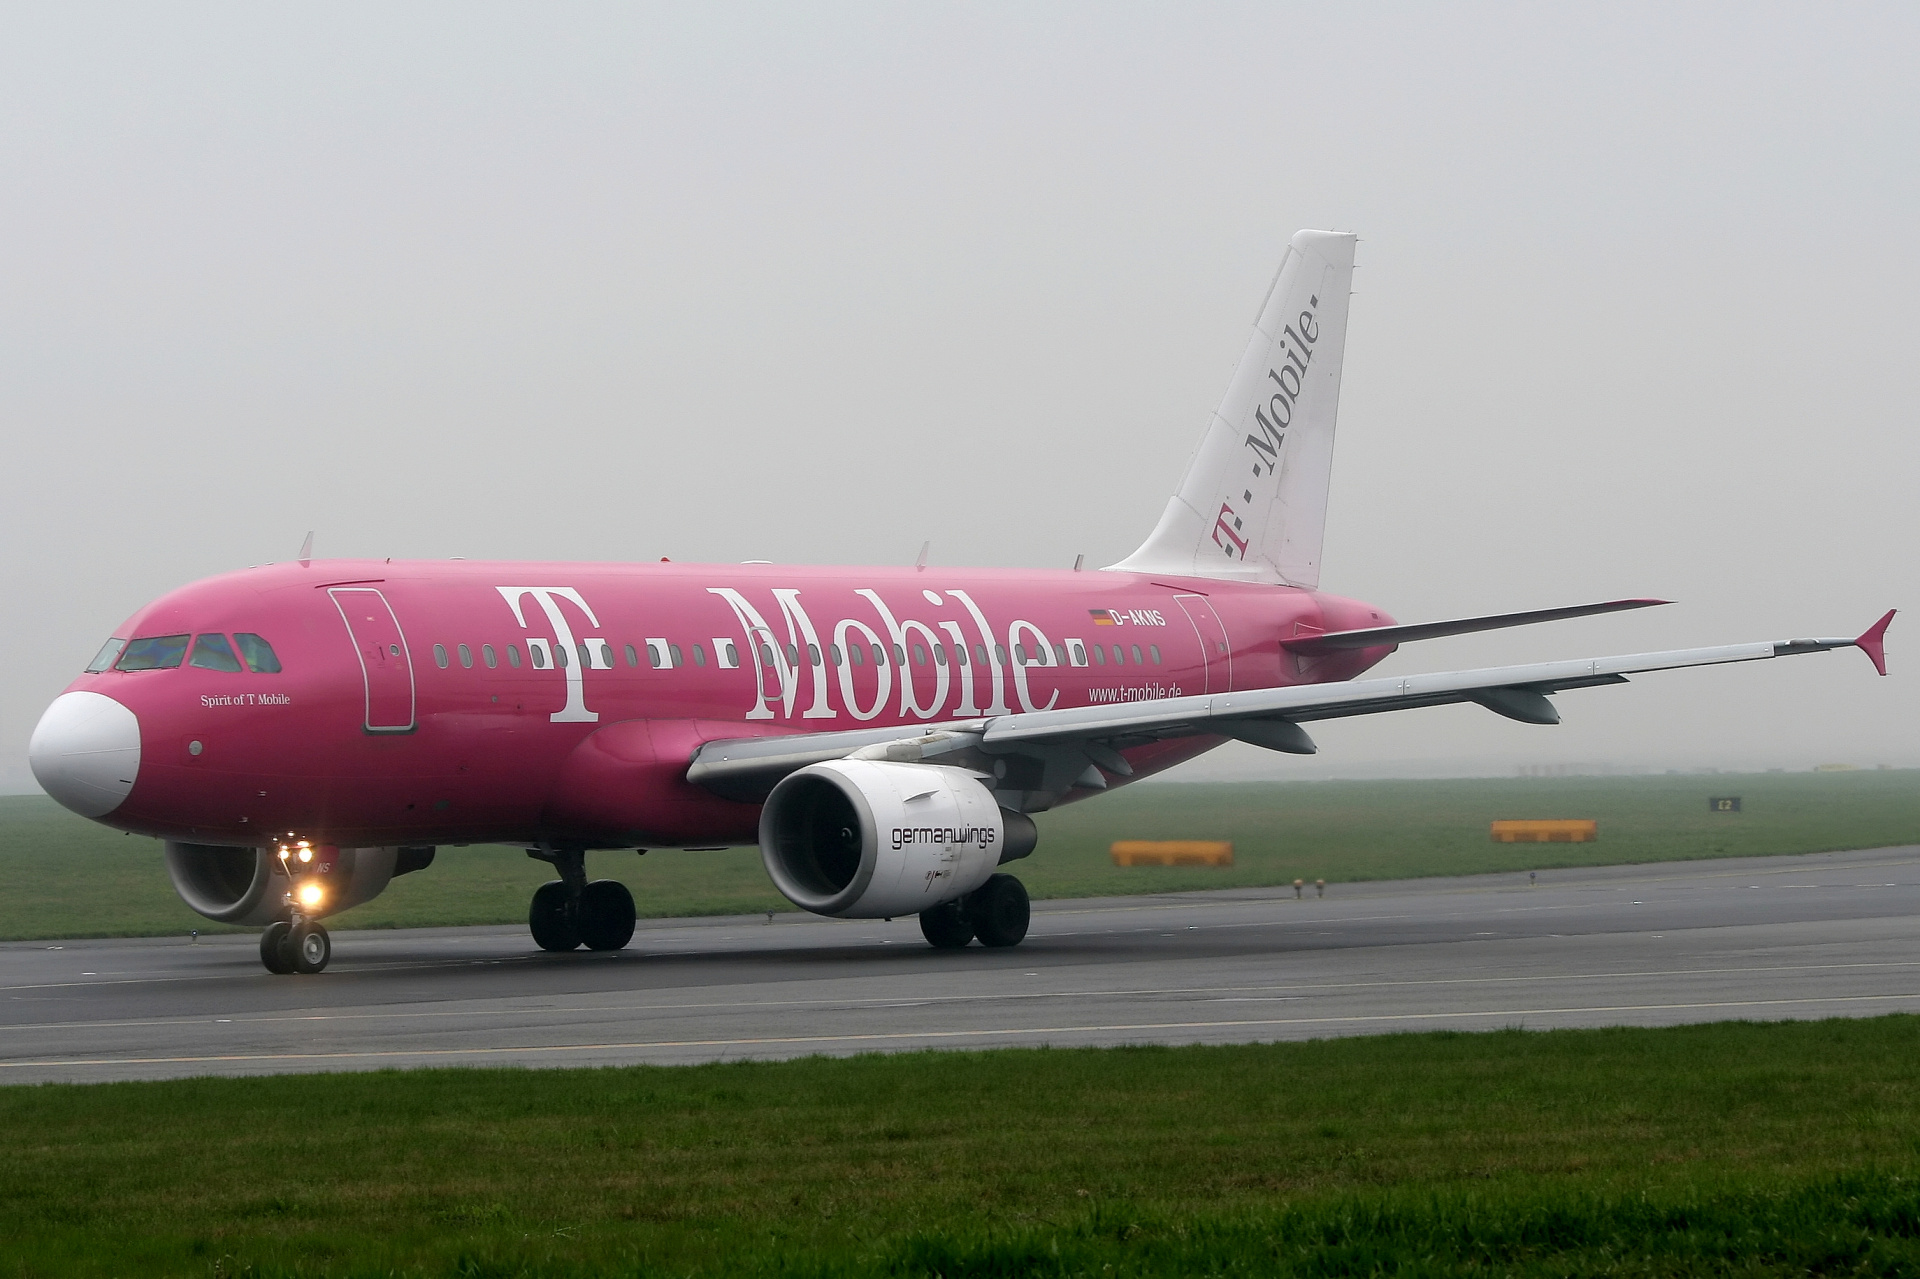 D-AKNS (T-Mobile livery) (Aircraft » EPWA Spotting » Airbus A319-100 » Germanwings)